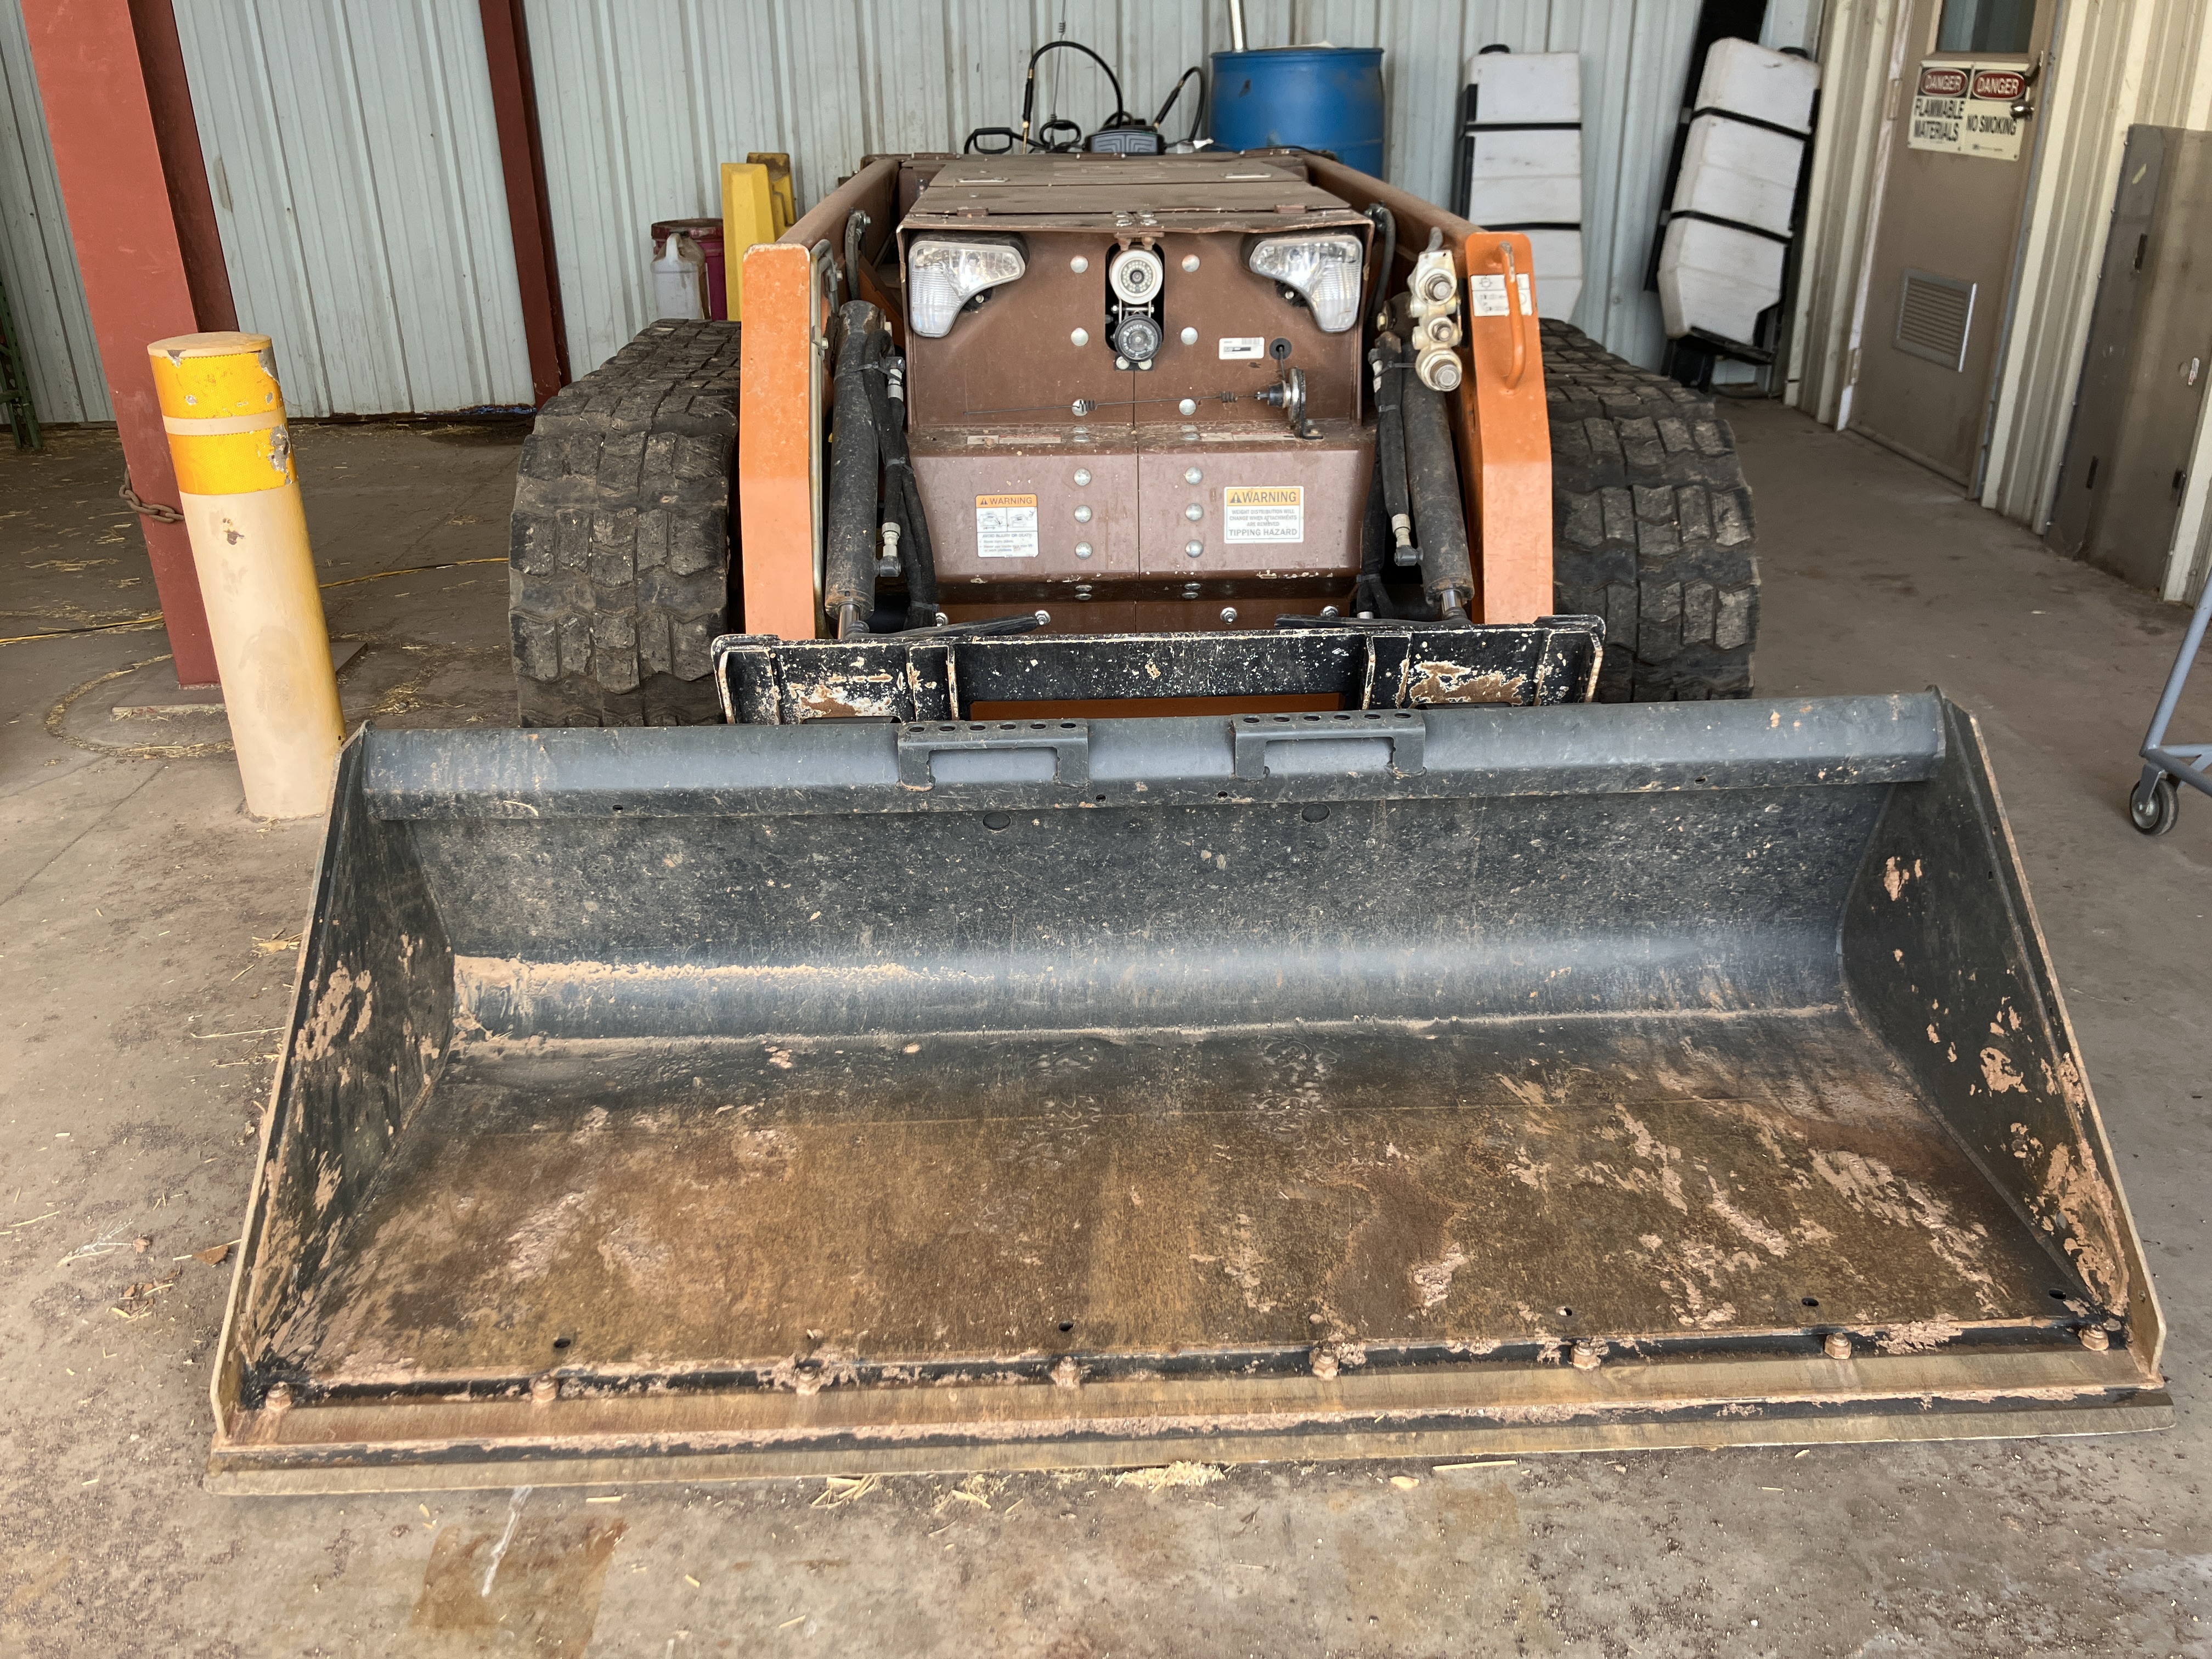 A remotely-controlled skid steer is parked in an equipment garage.